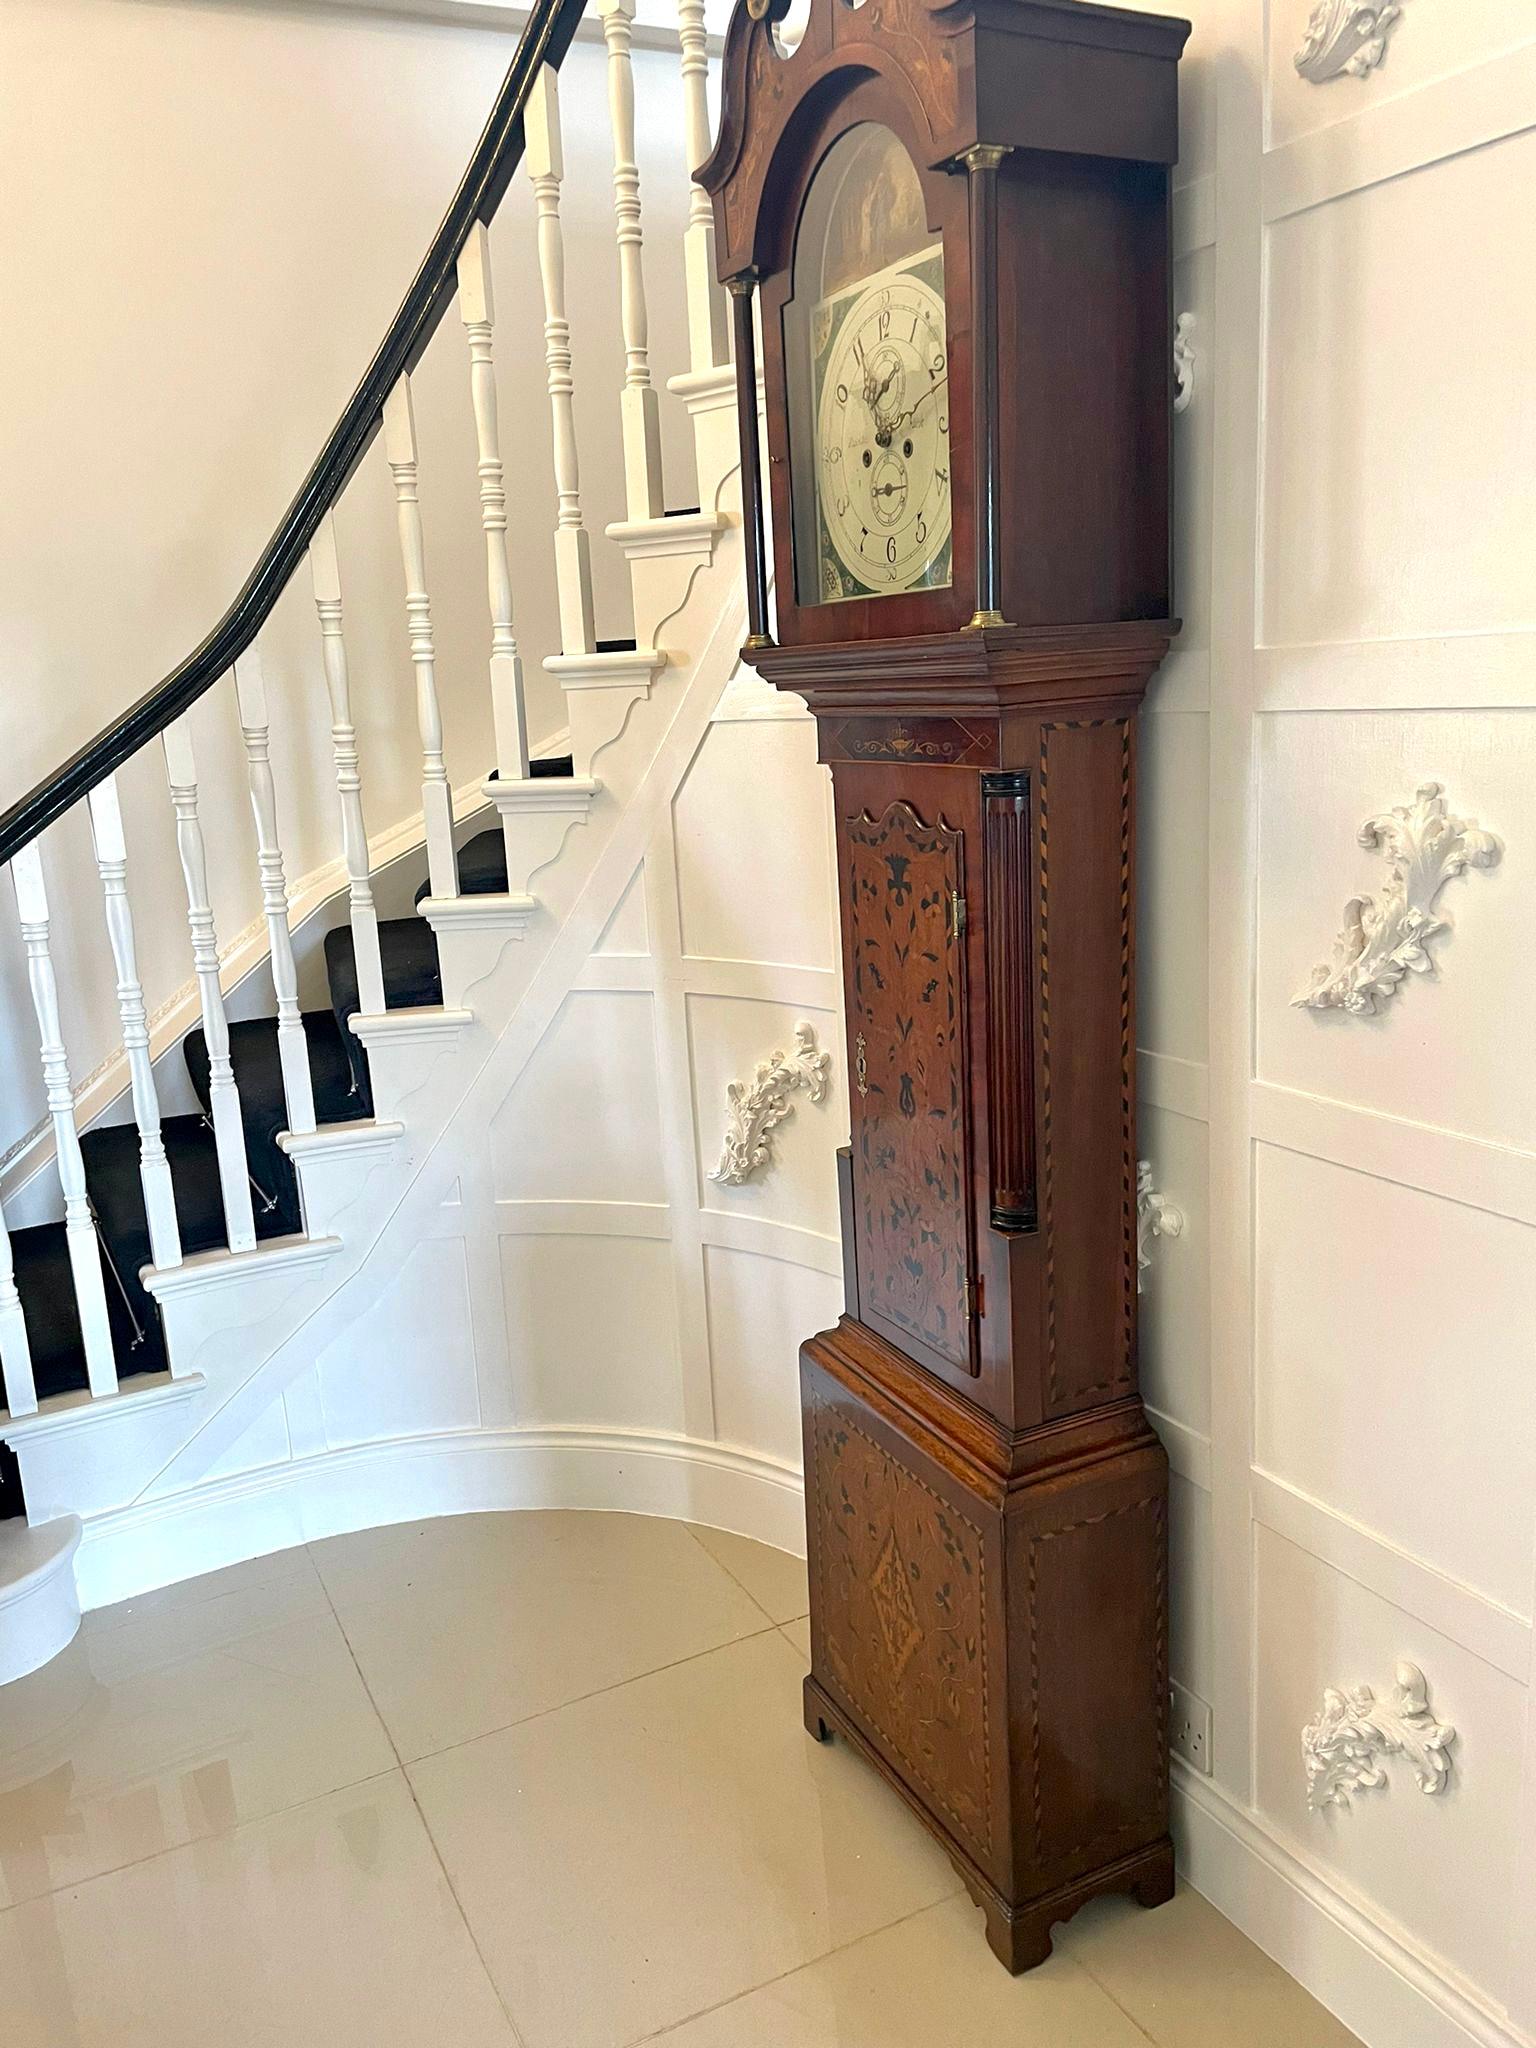 Outstanding antique quality inlaid marquetry oak and mahogany George IIIl longcase clock having an outstanding inlaid marquetry oak and mahogany case with birds, flowers, leaves and an urn, swan neck pediment, turned columns, arched glazed door,